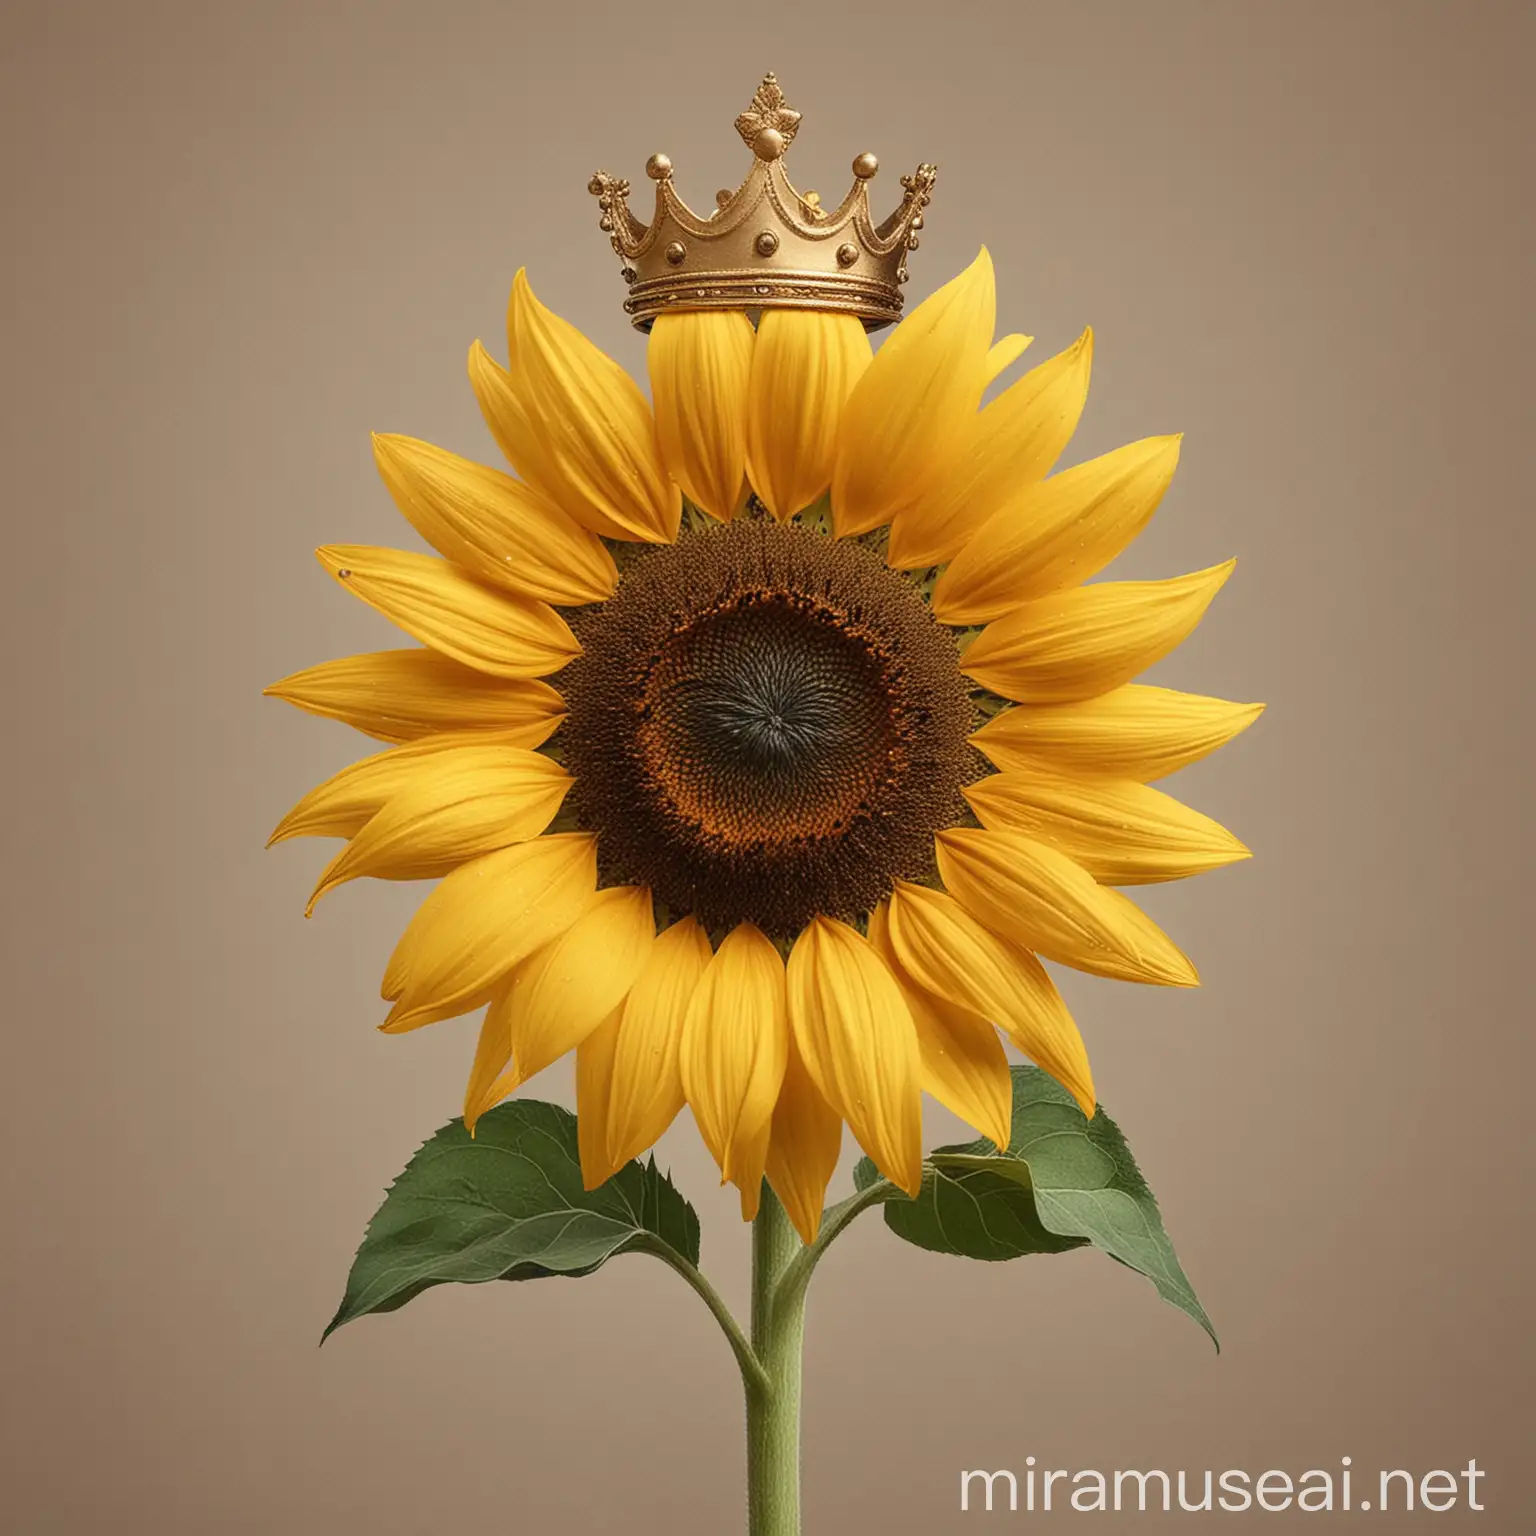 Majestic Sunflower Wearing a Regal Crown Vibrant Floral Art